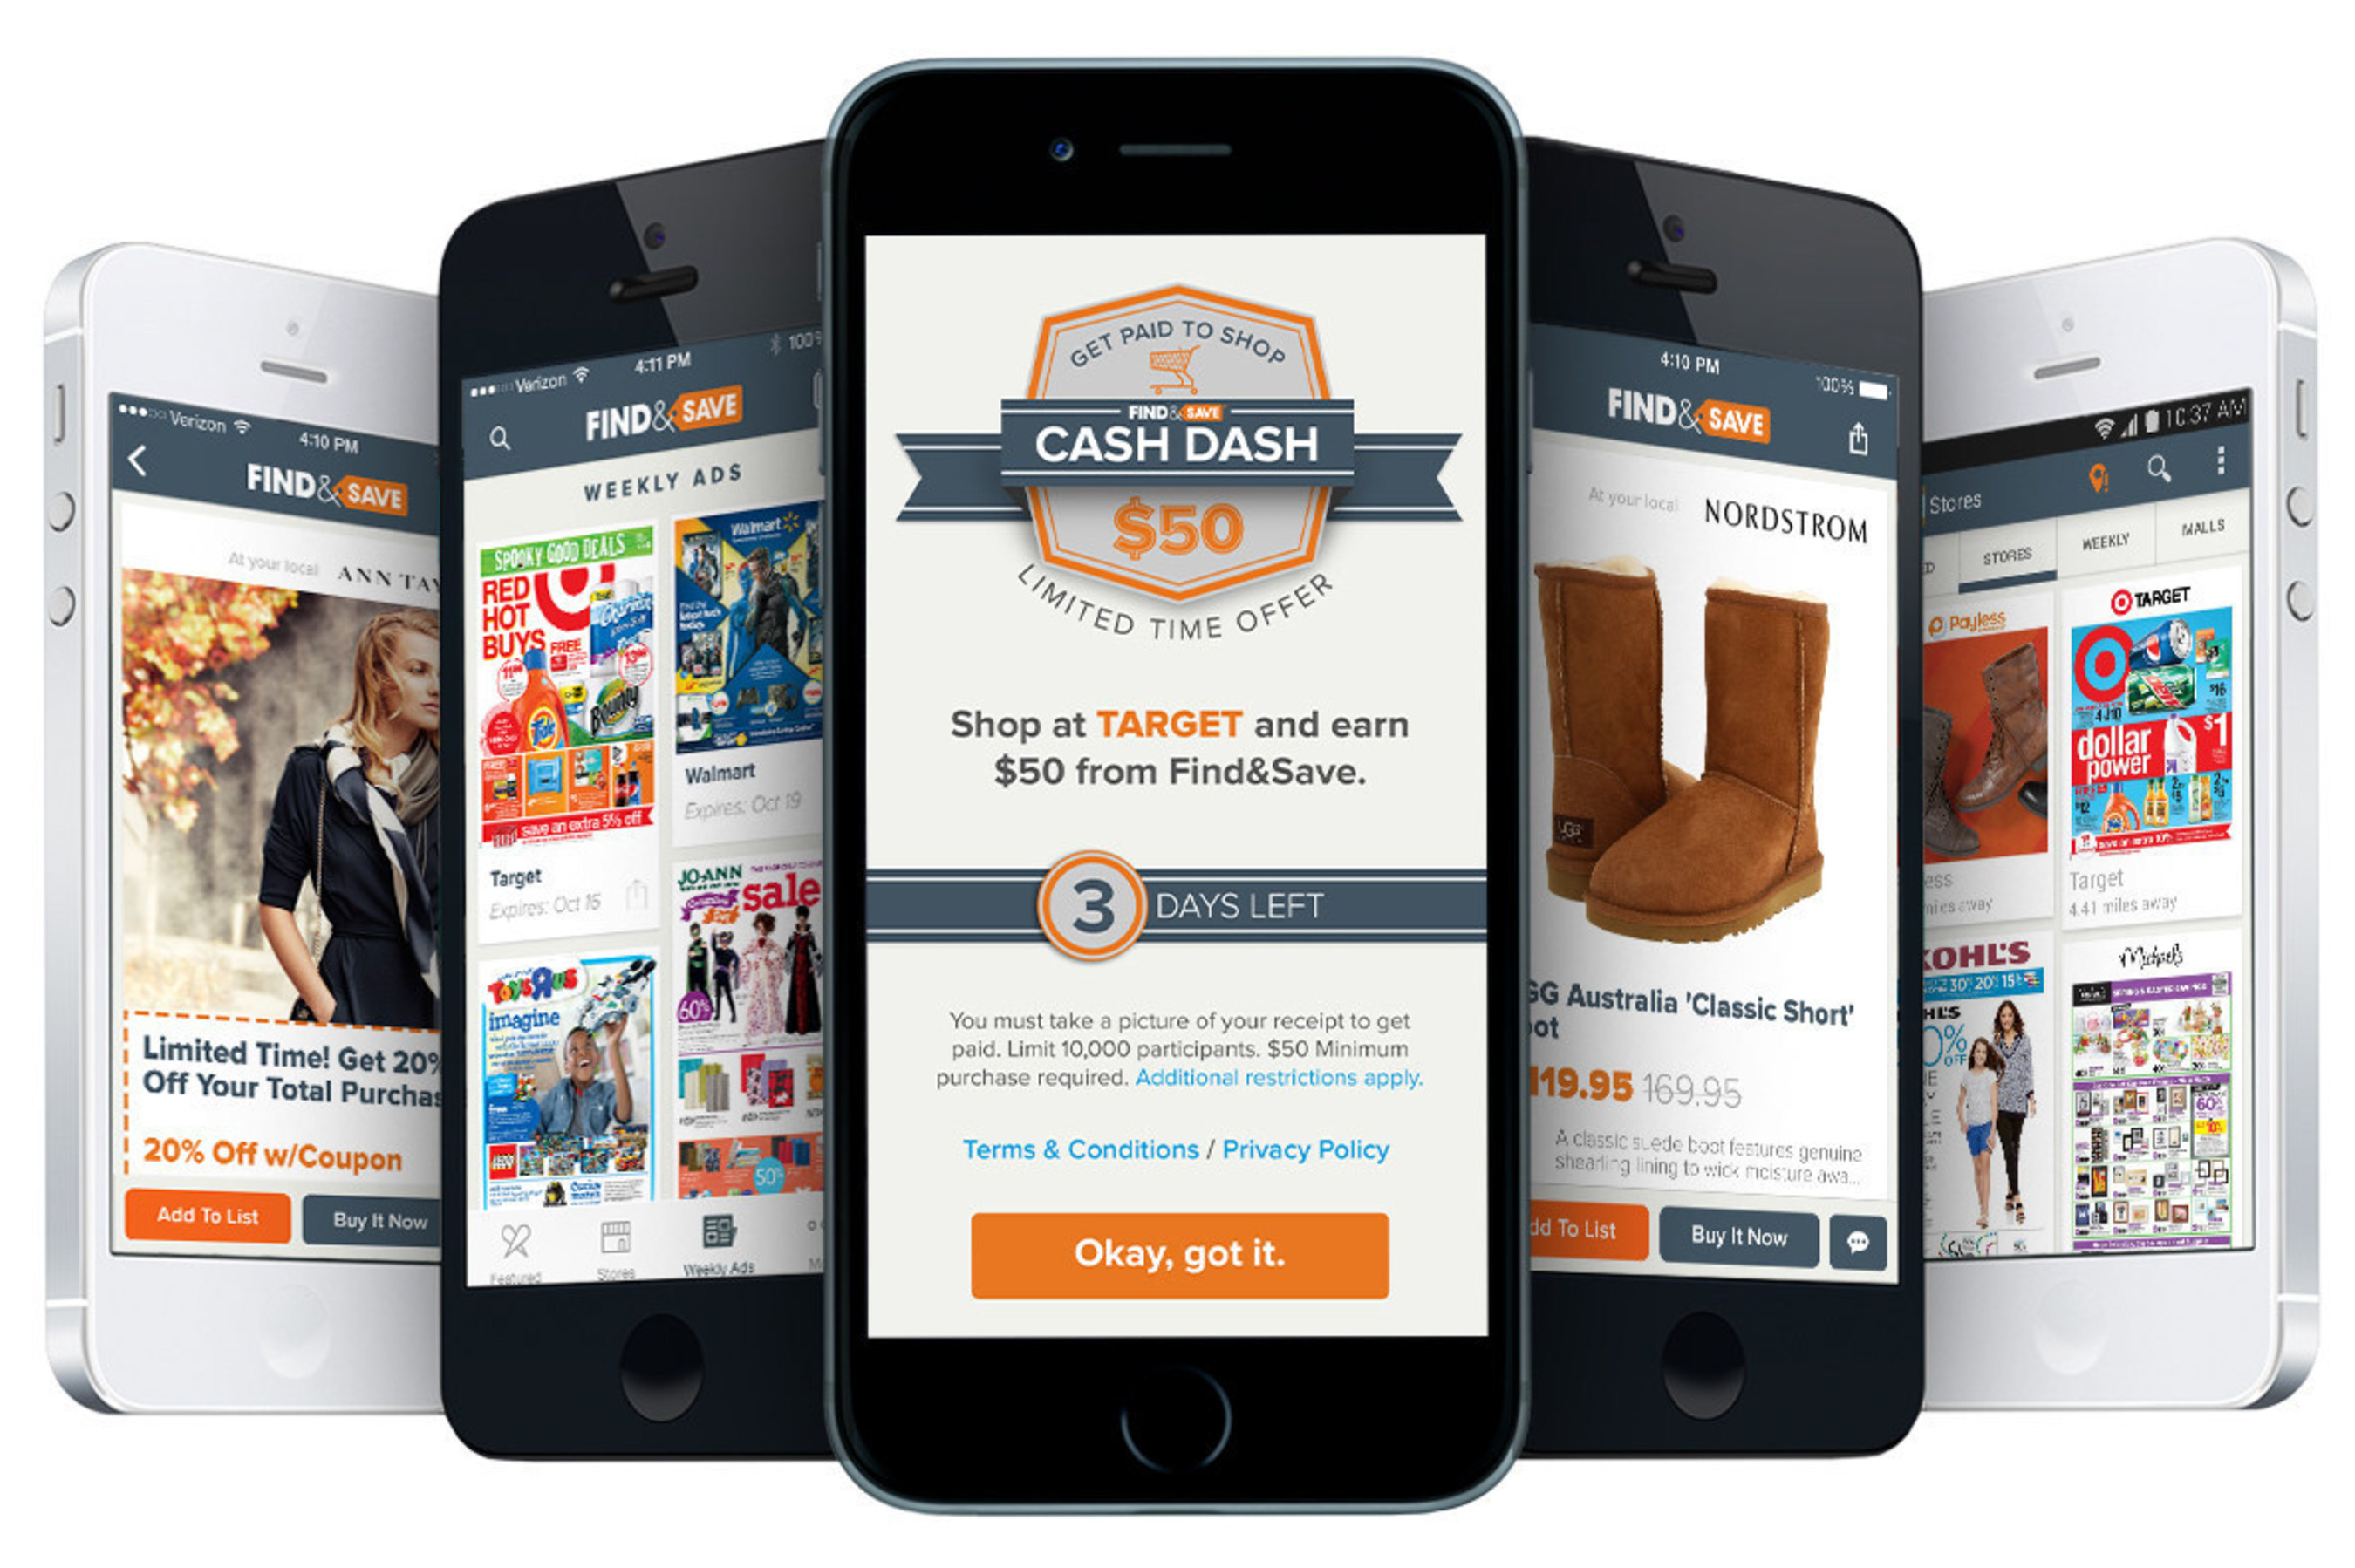 Shoppers will have multiple opportunities to receive up to $50 cash back after just one in-store purchase with the new Cash Dash feature in the Find&Save mobile phone app. About Find&Save for iPhone and Android: findnsave.com/apps